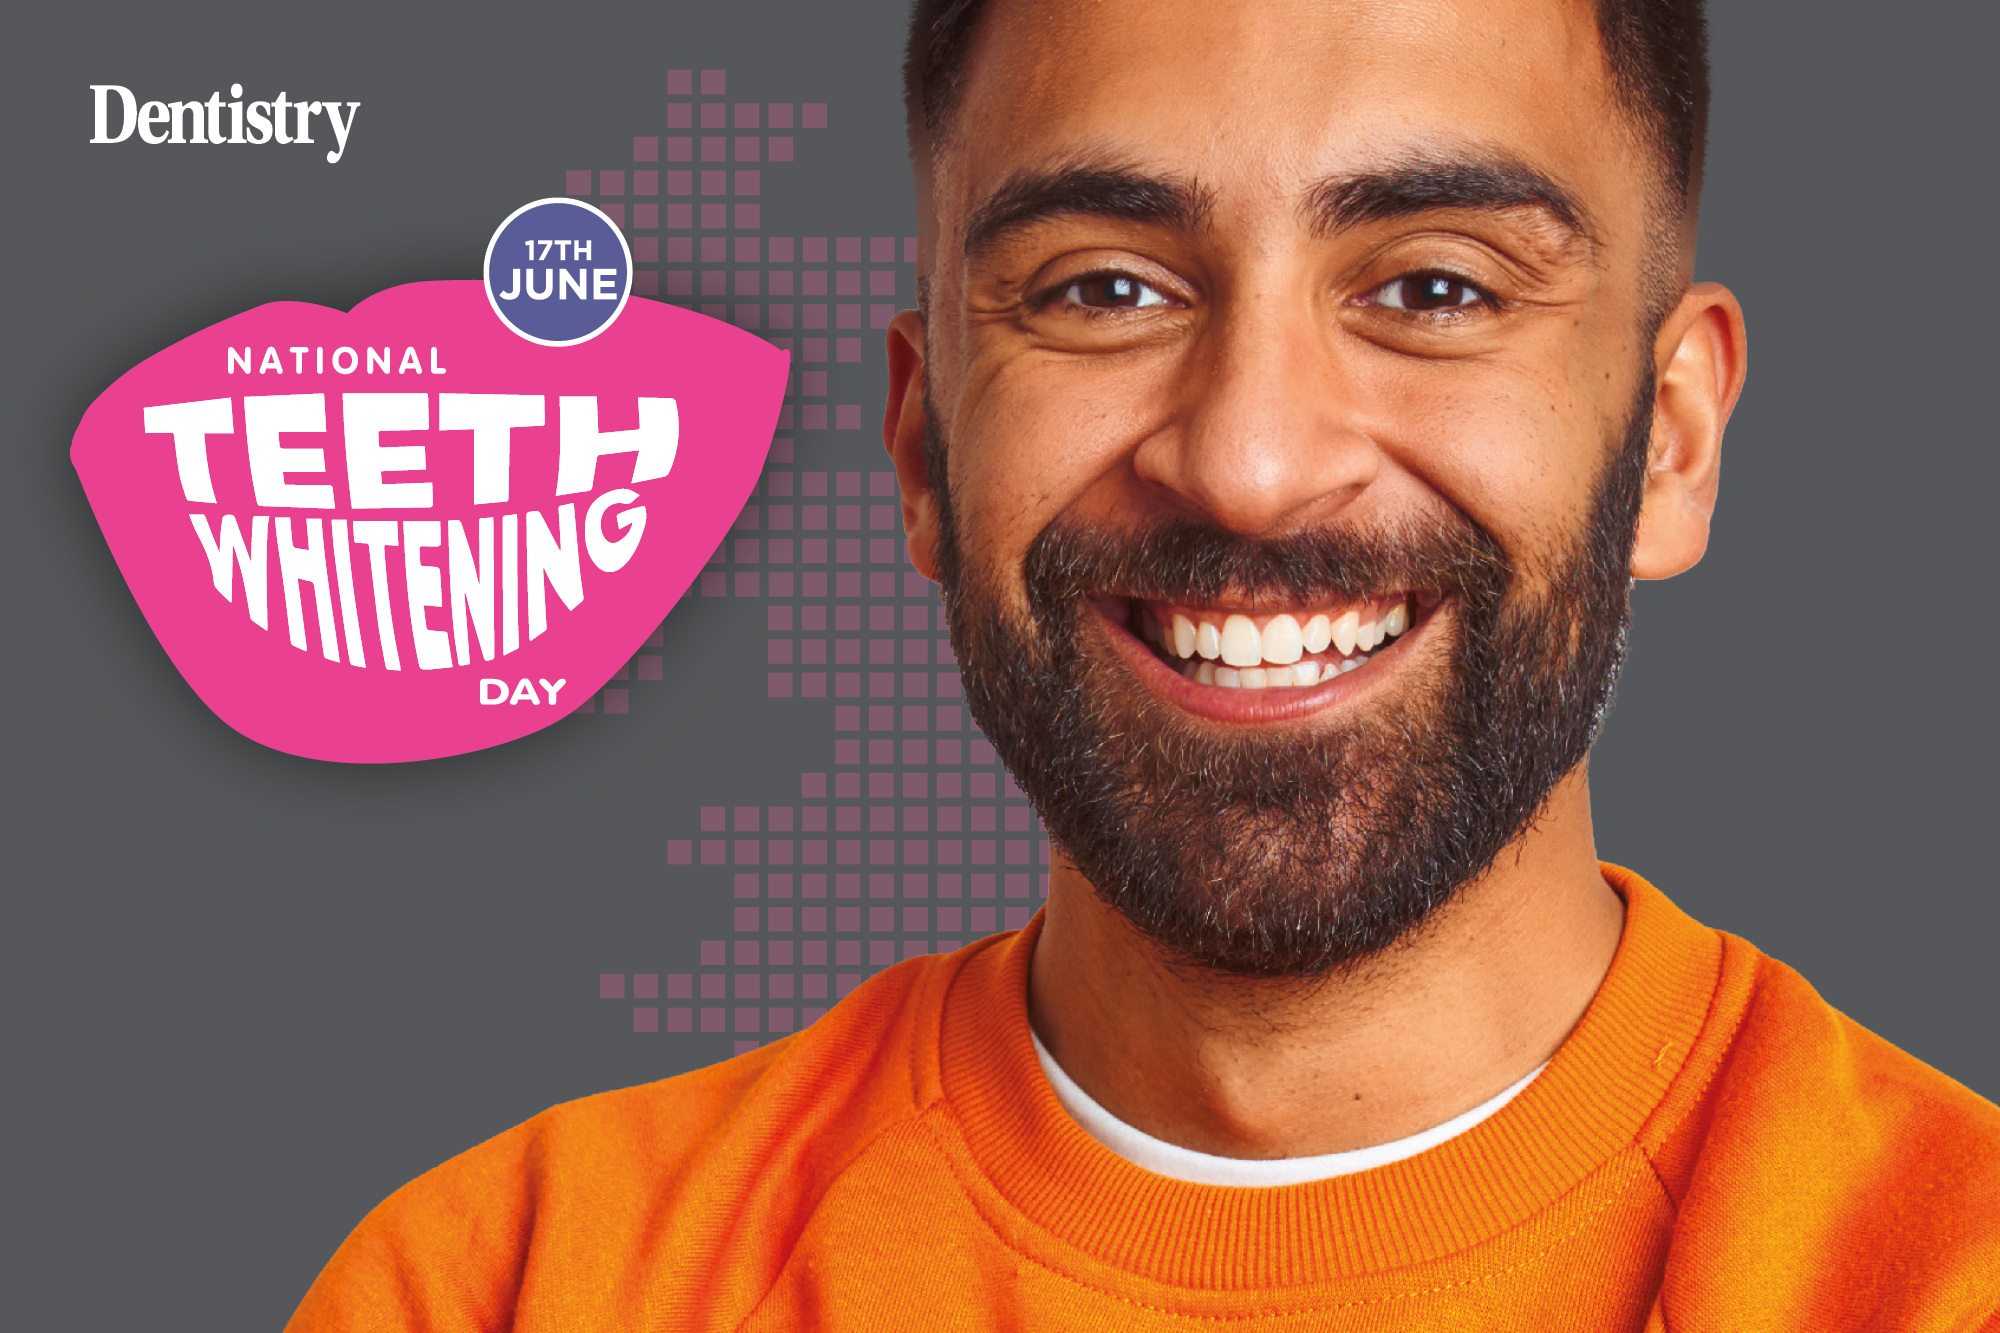 Case study: enhancing smiles with tooth whitening